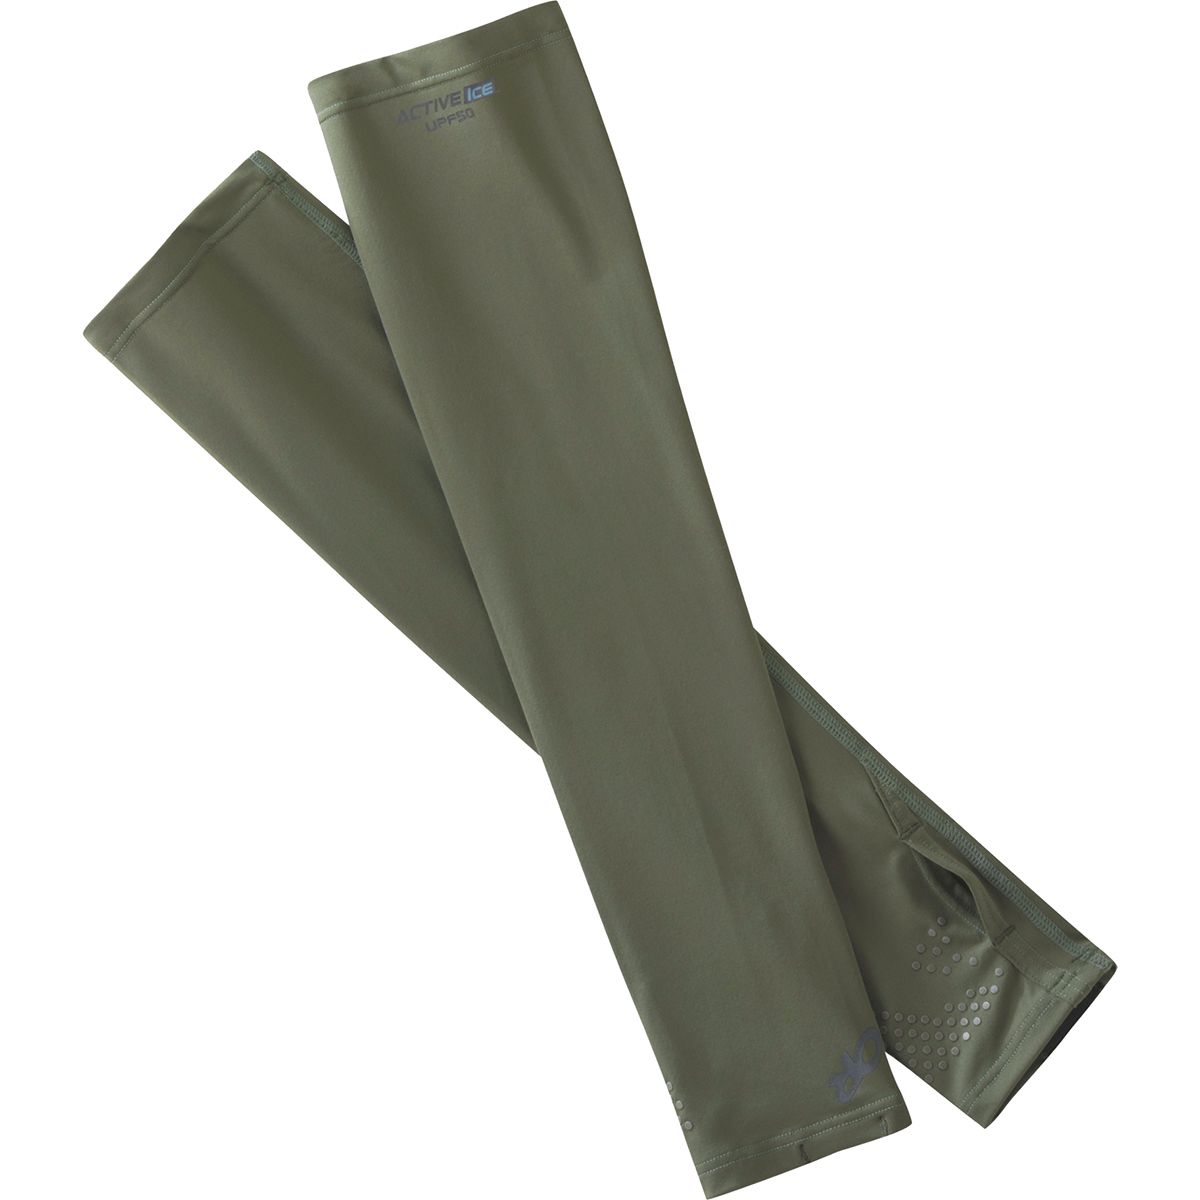 Outdoor Research ActiveIce Sun Sleeves Reviews - Trailspace